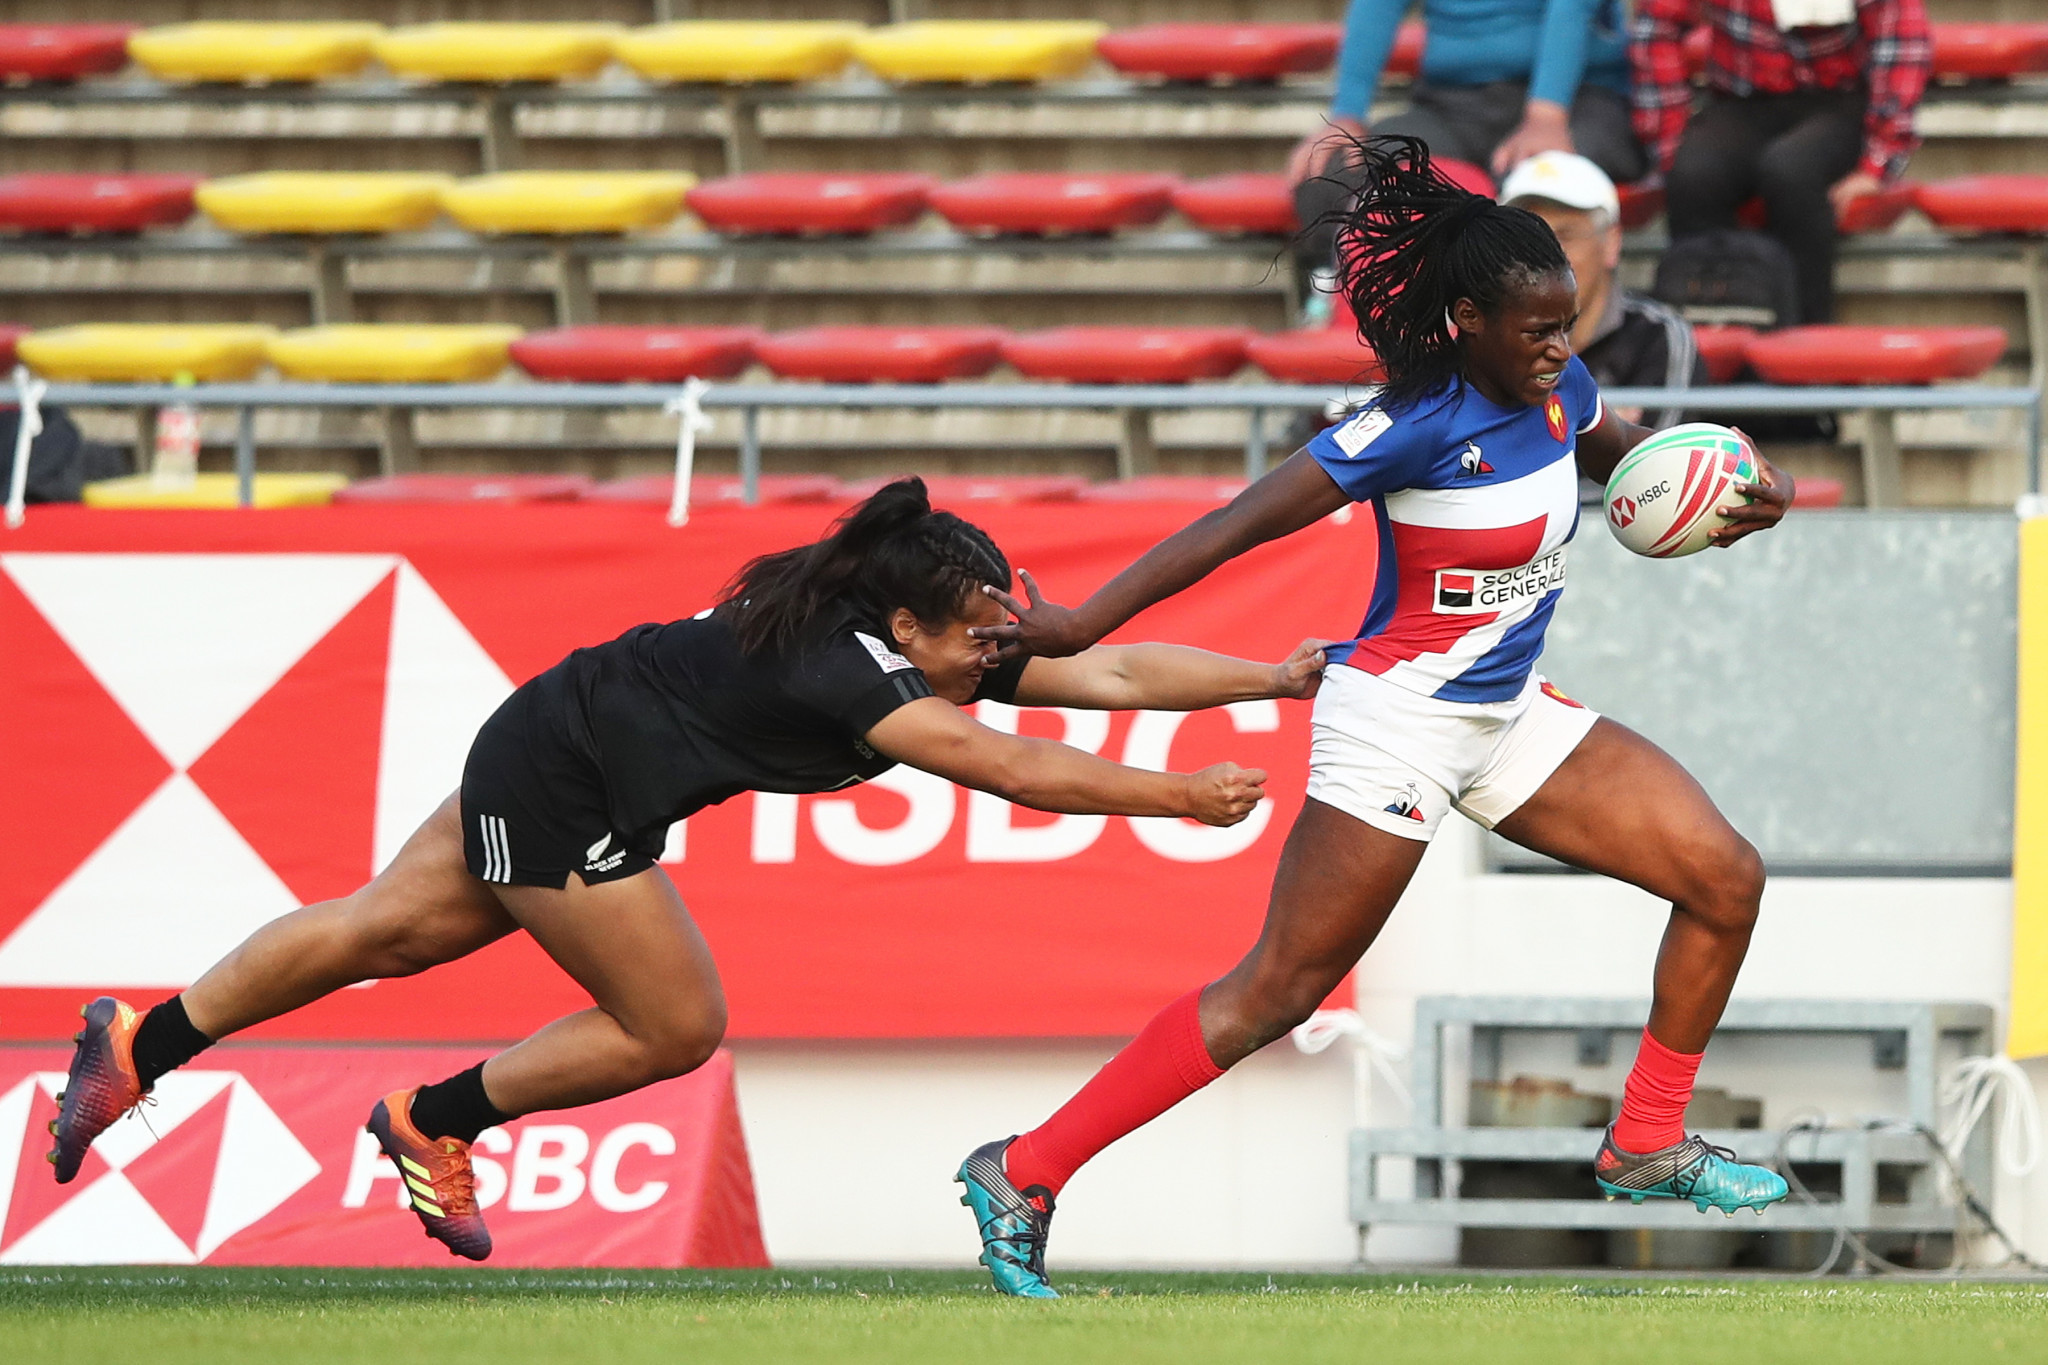 France defeated New Zealand at the World Rugby Seven Series in Kitakyushu ©World Rugby